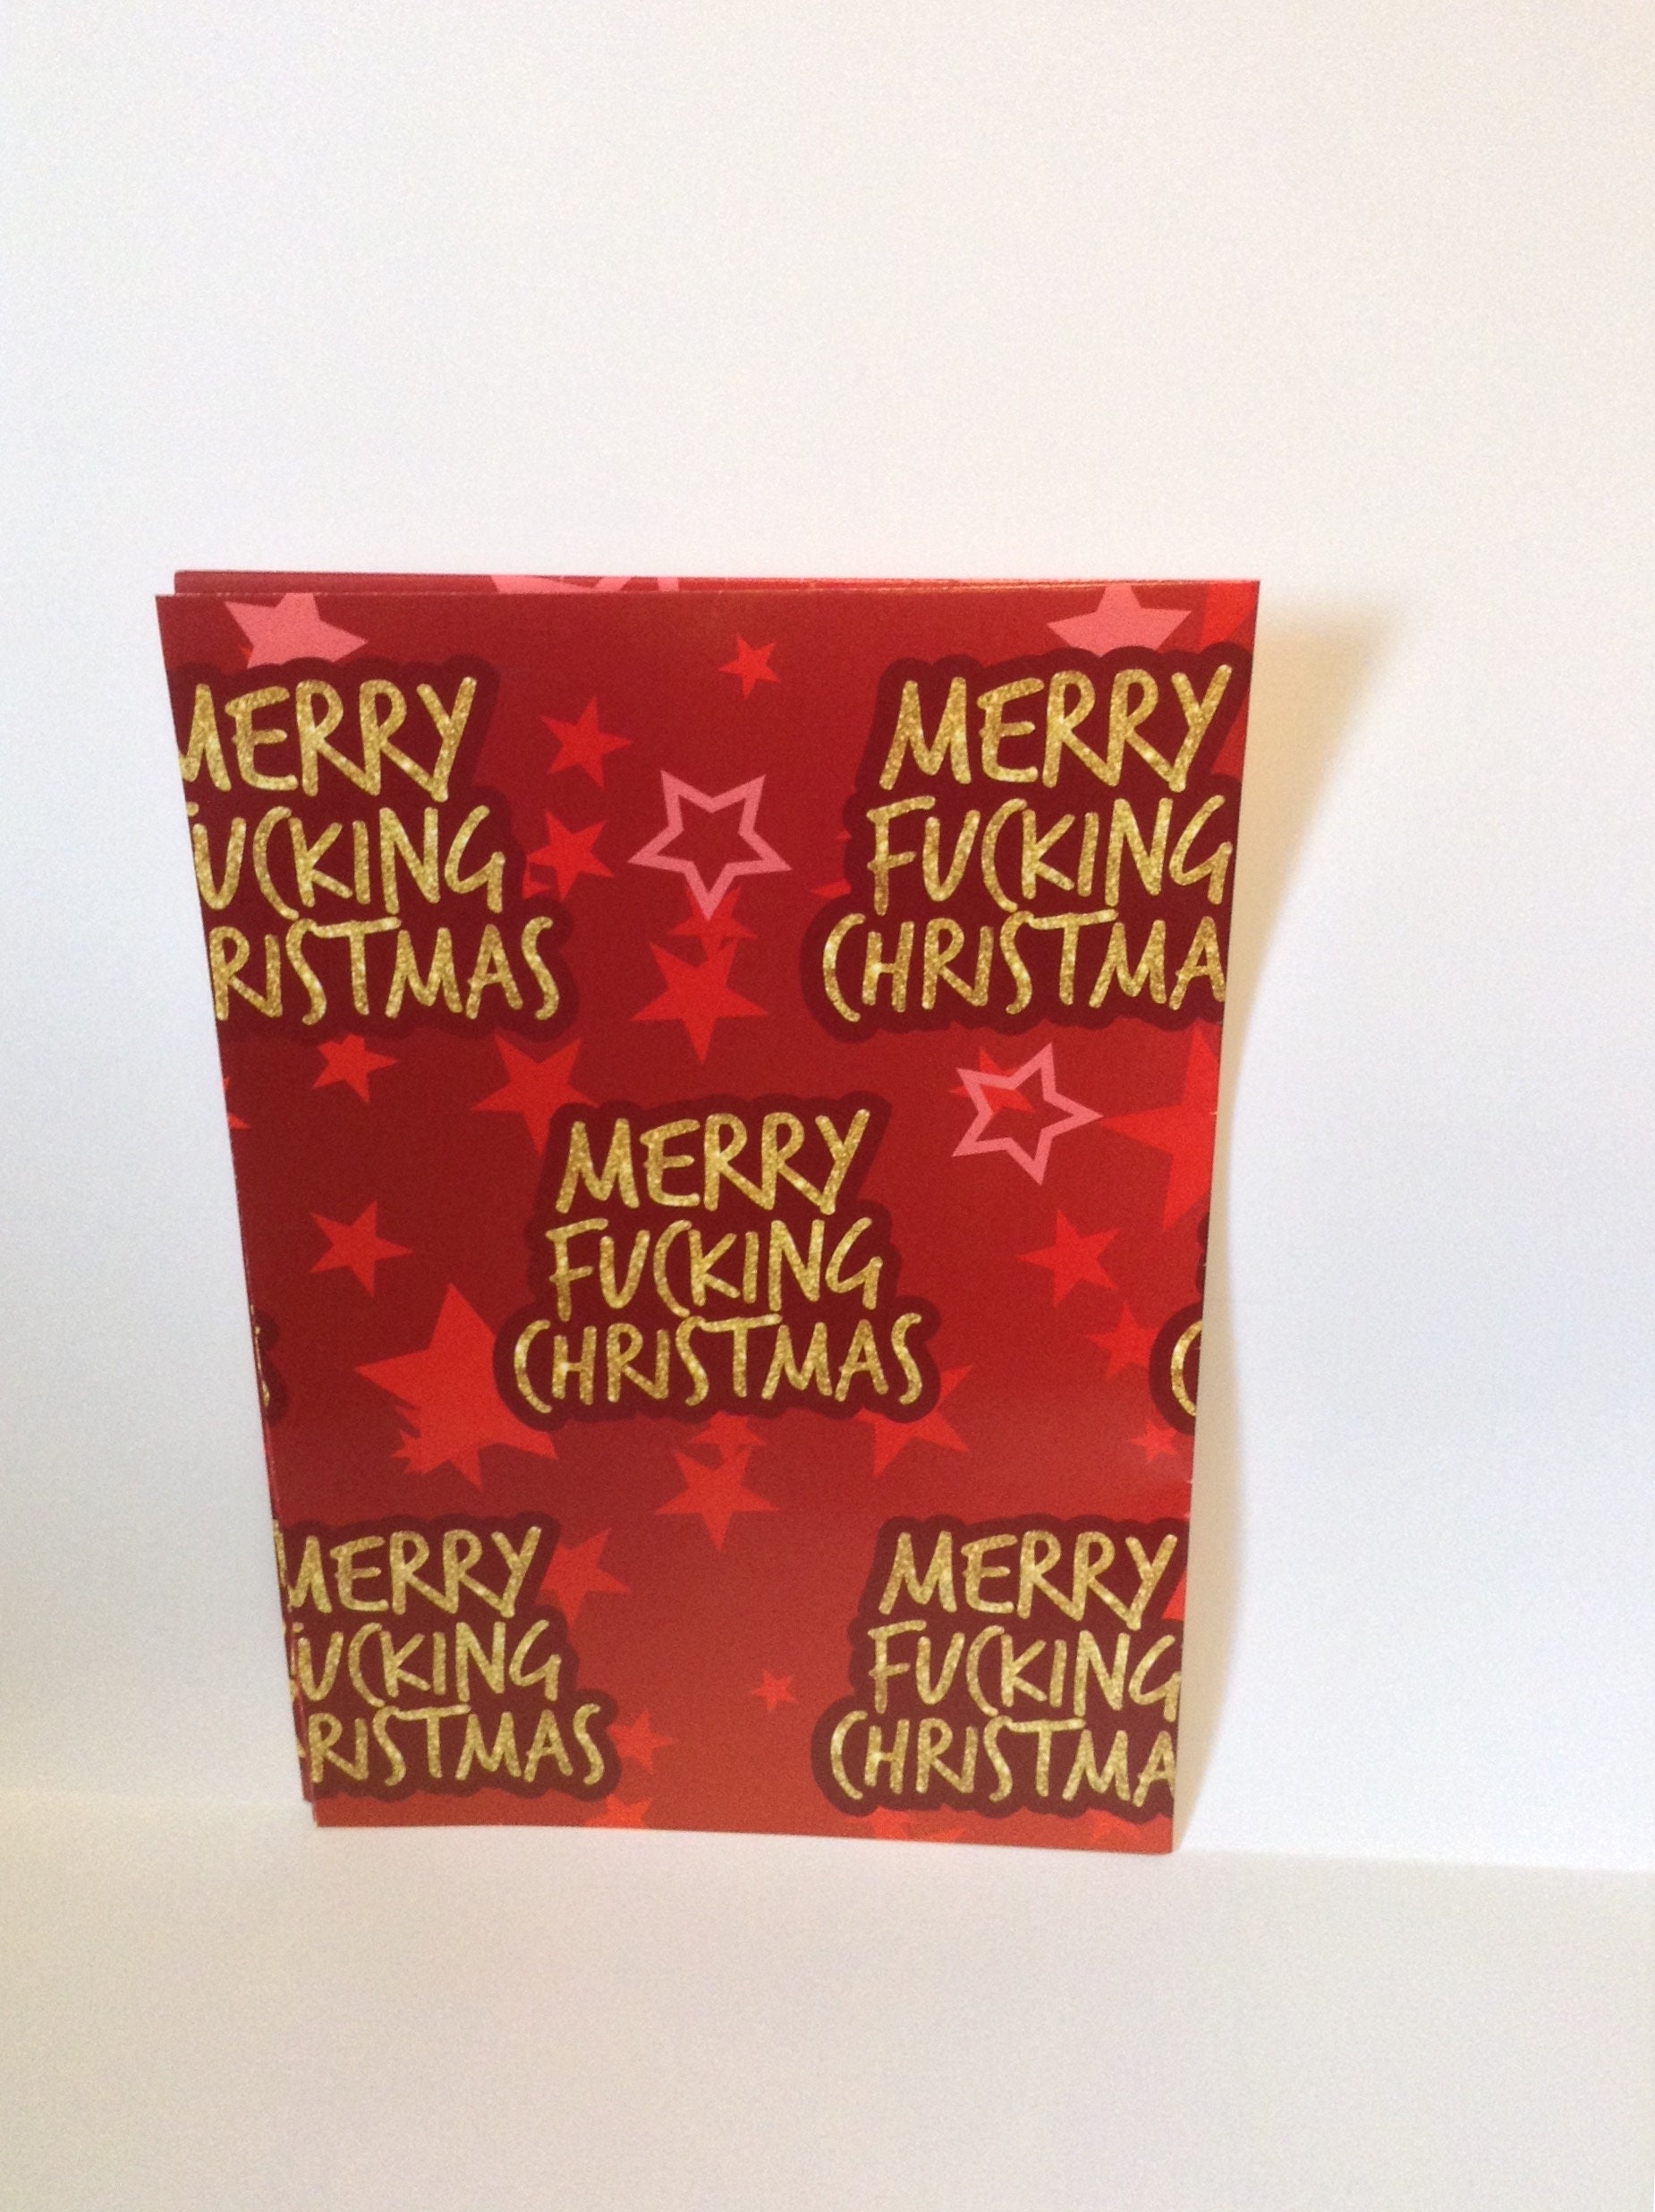 Merry Fucking Christmas Buffalo Check Wrapping paper 3 sheets 20x29 inches 